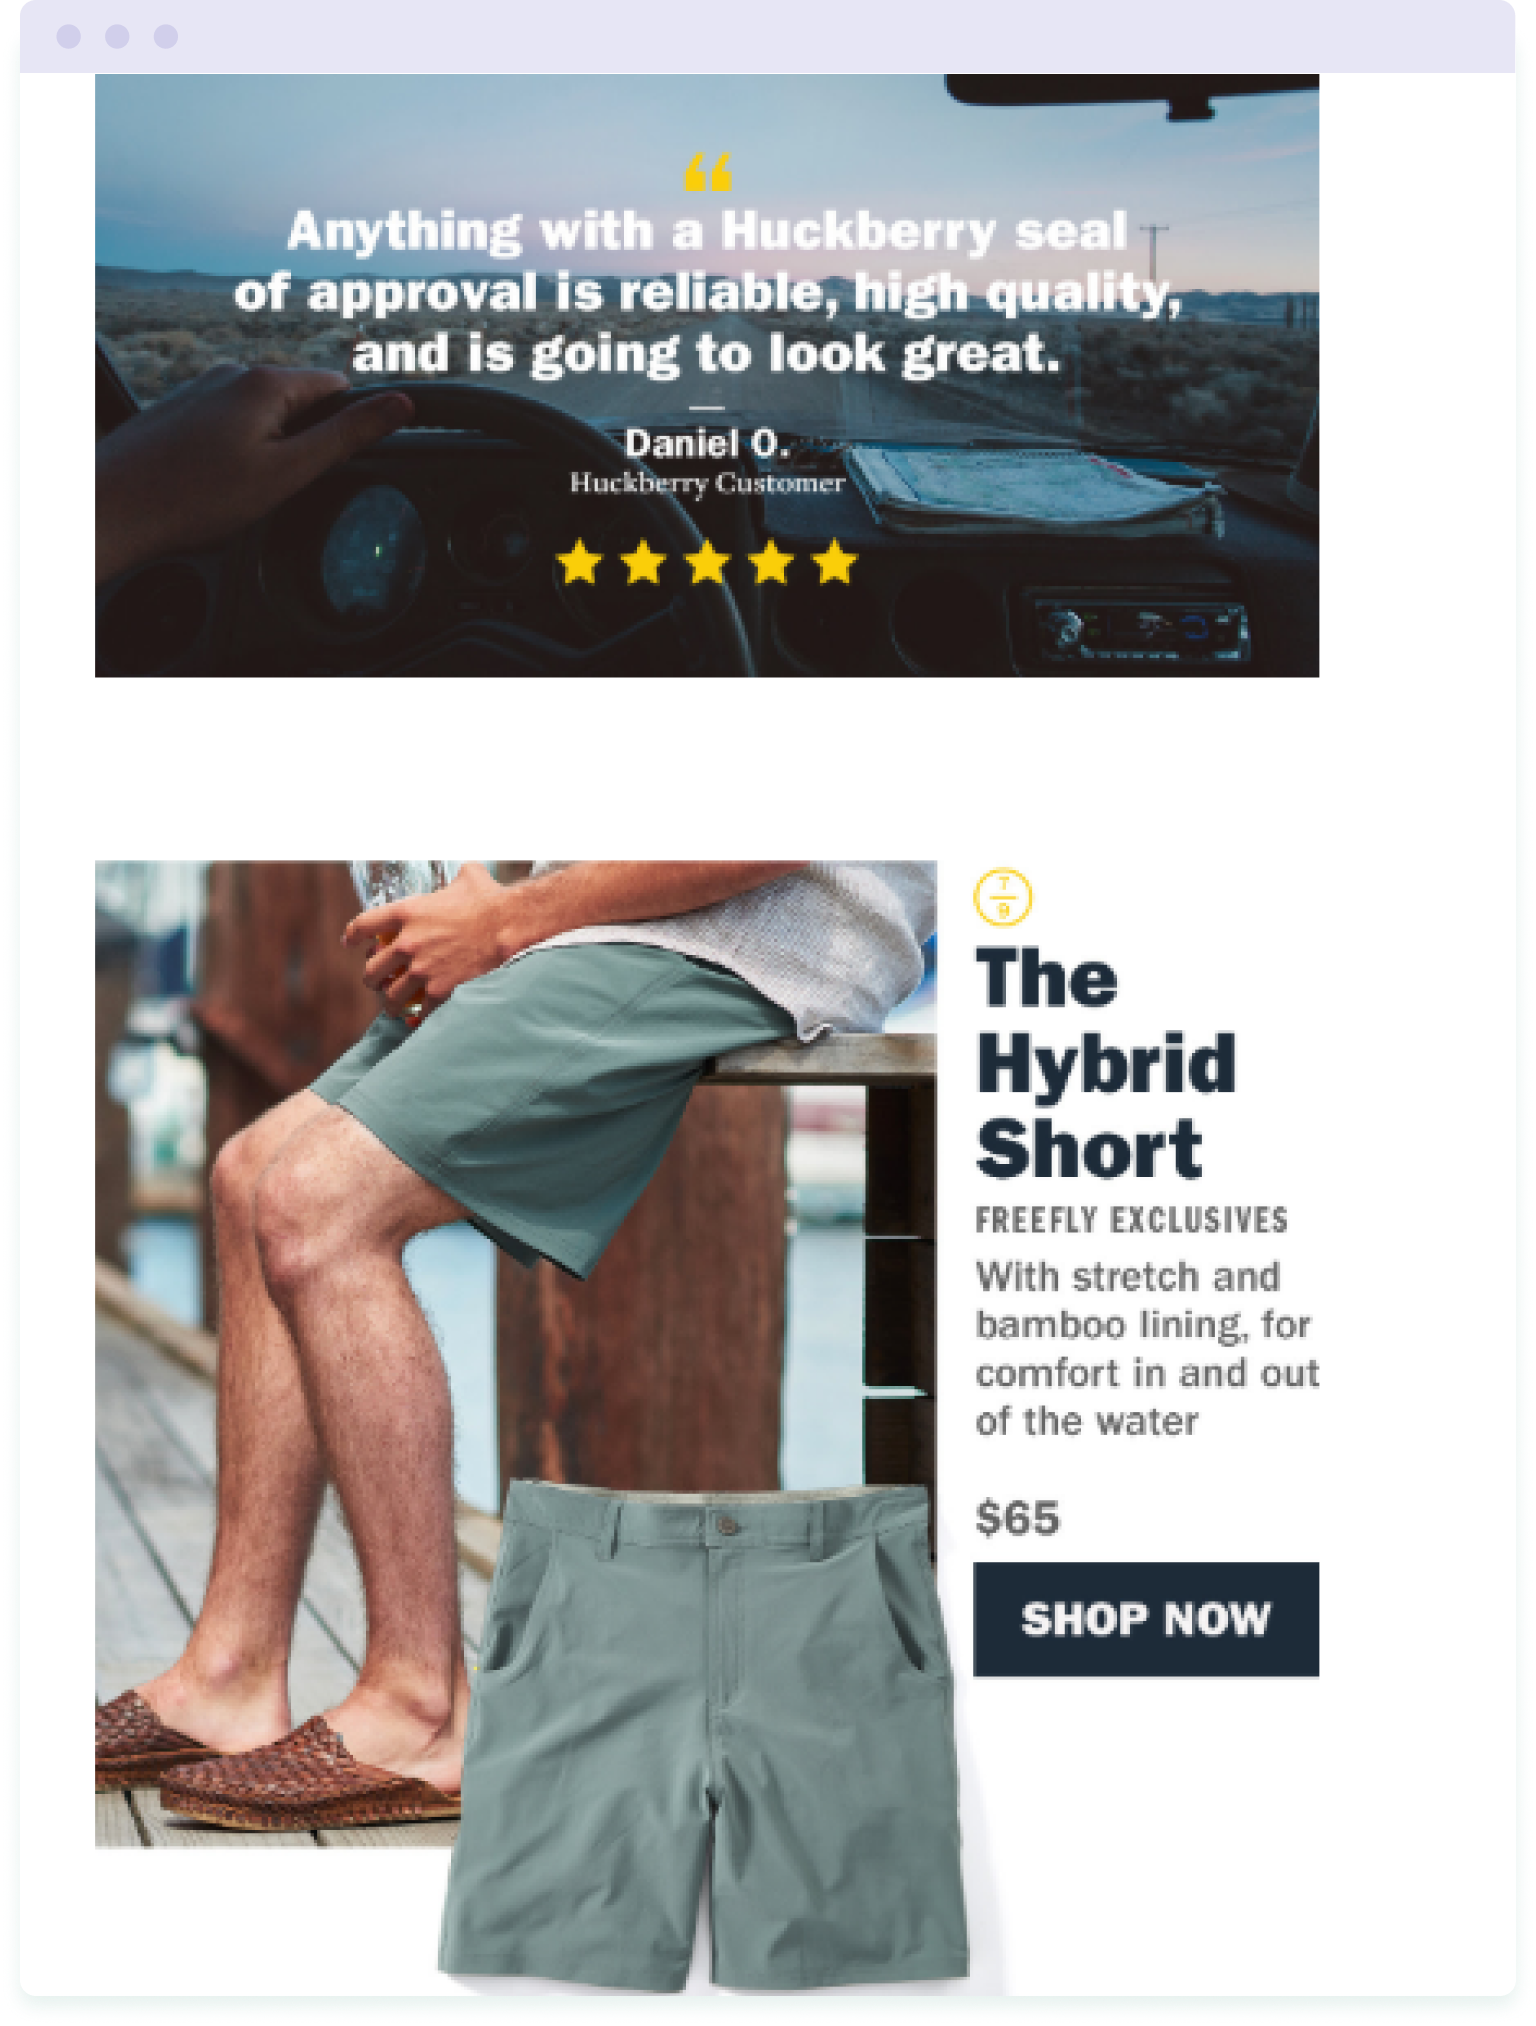 Example of an email marketing campaign from Huckberry that combines humour with a sales message